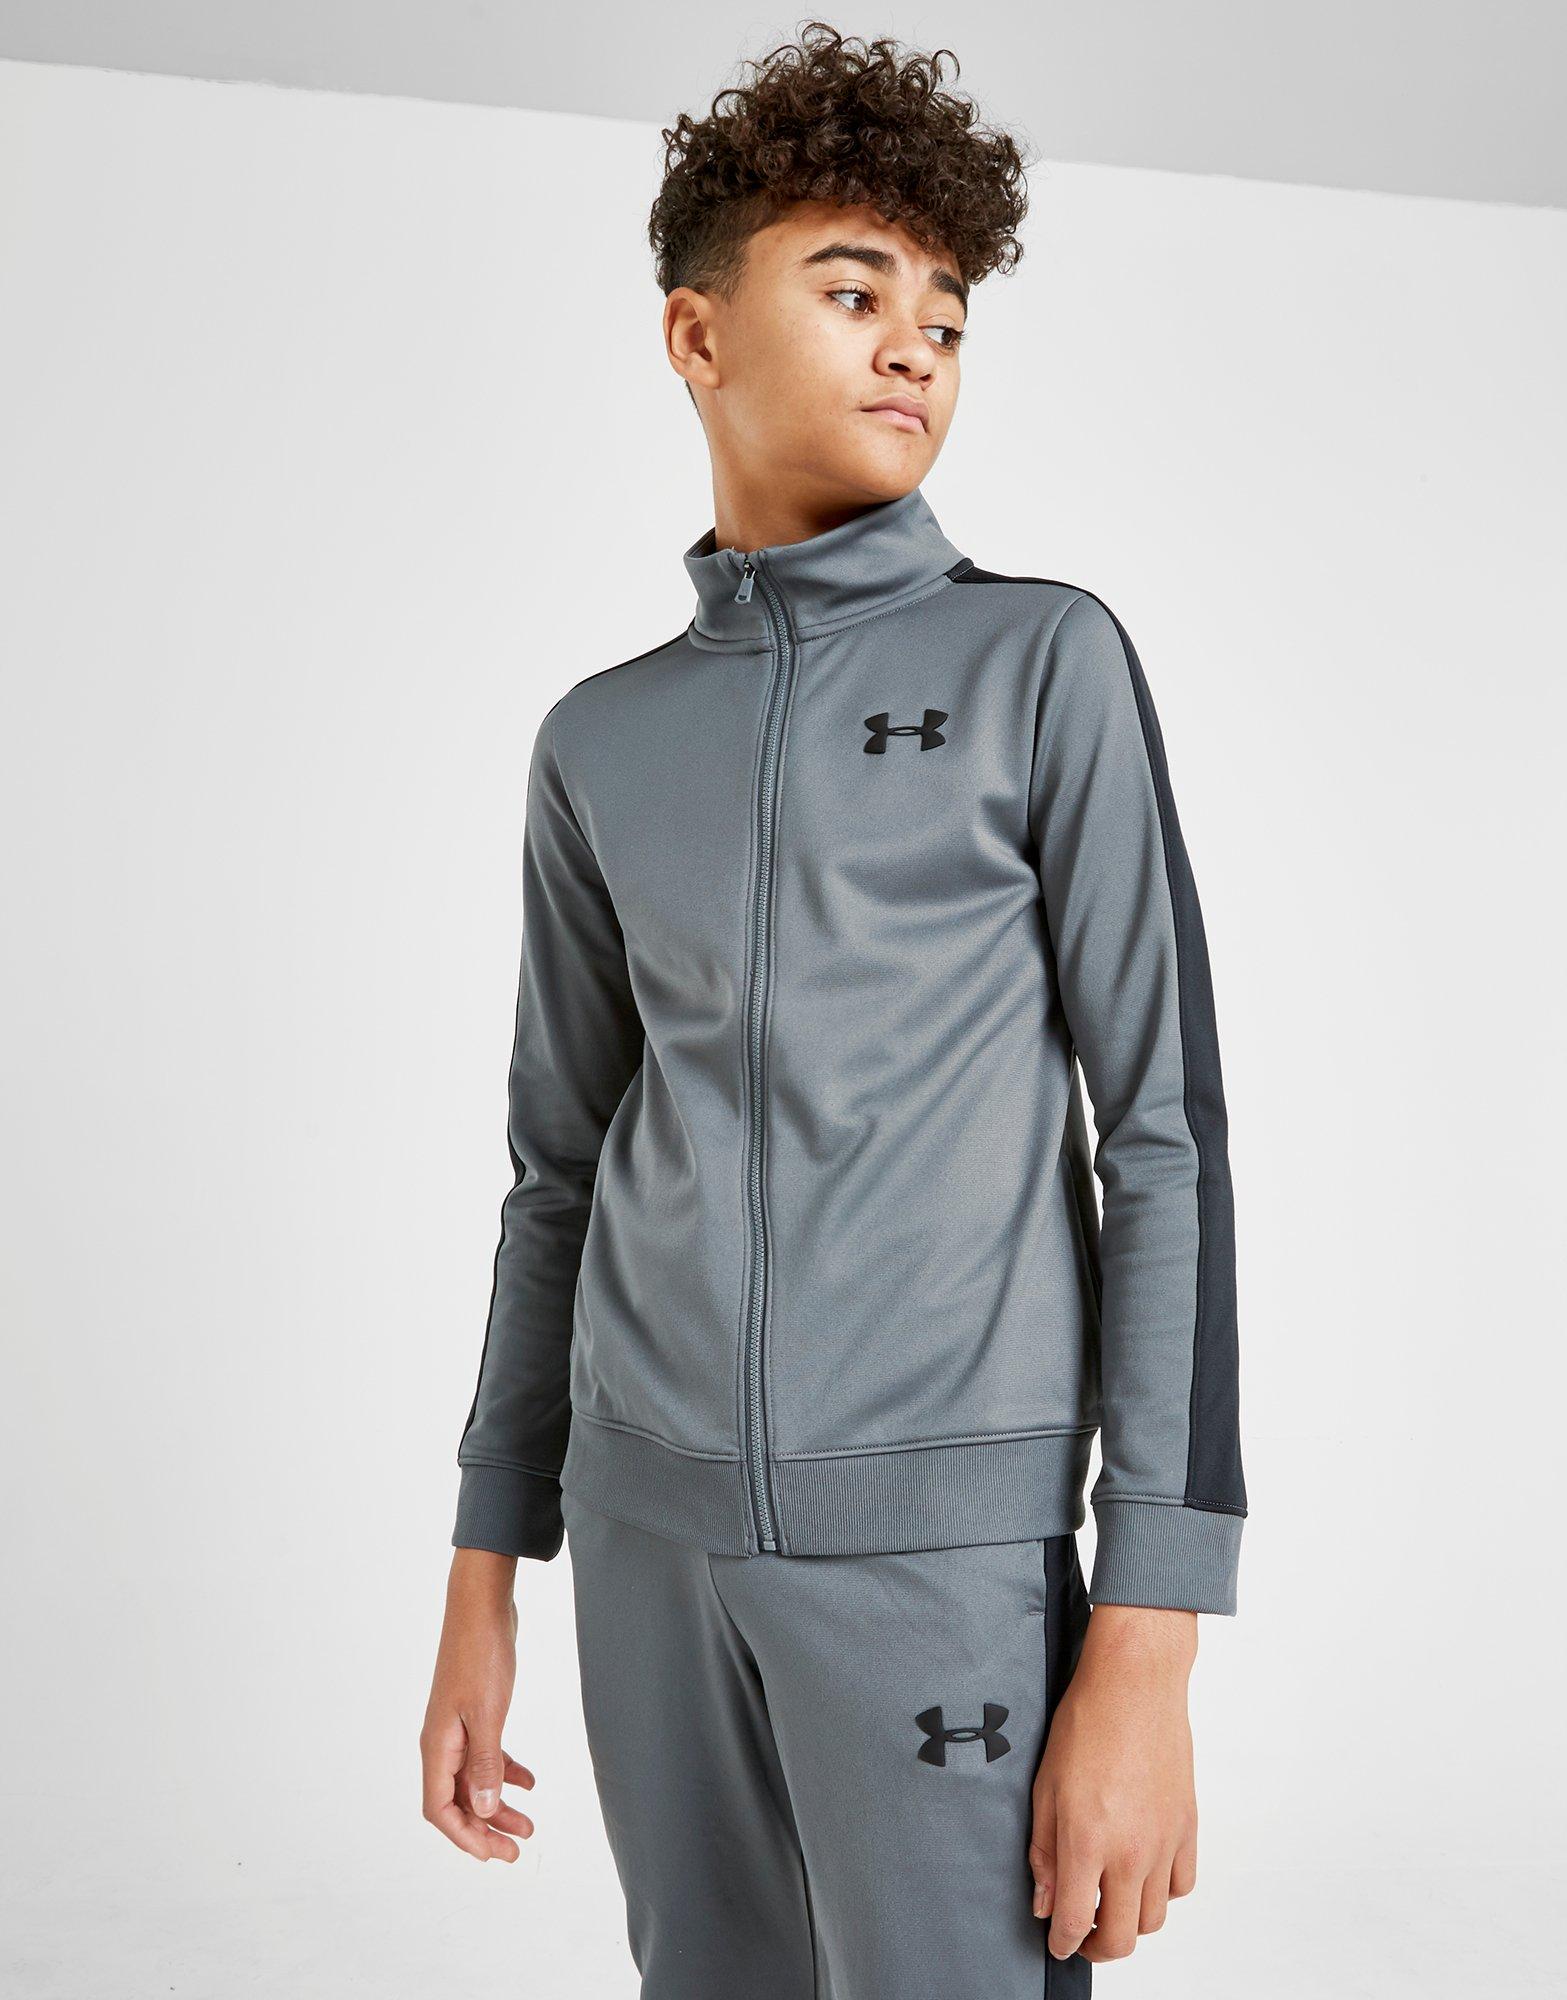 grey under armour tracksuit